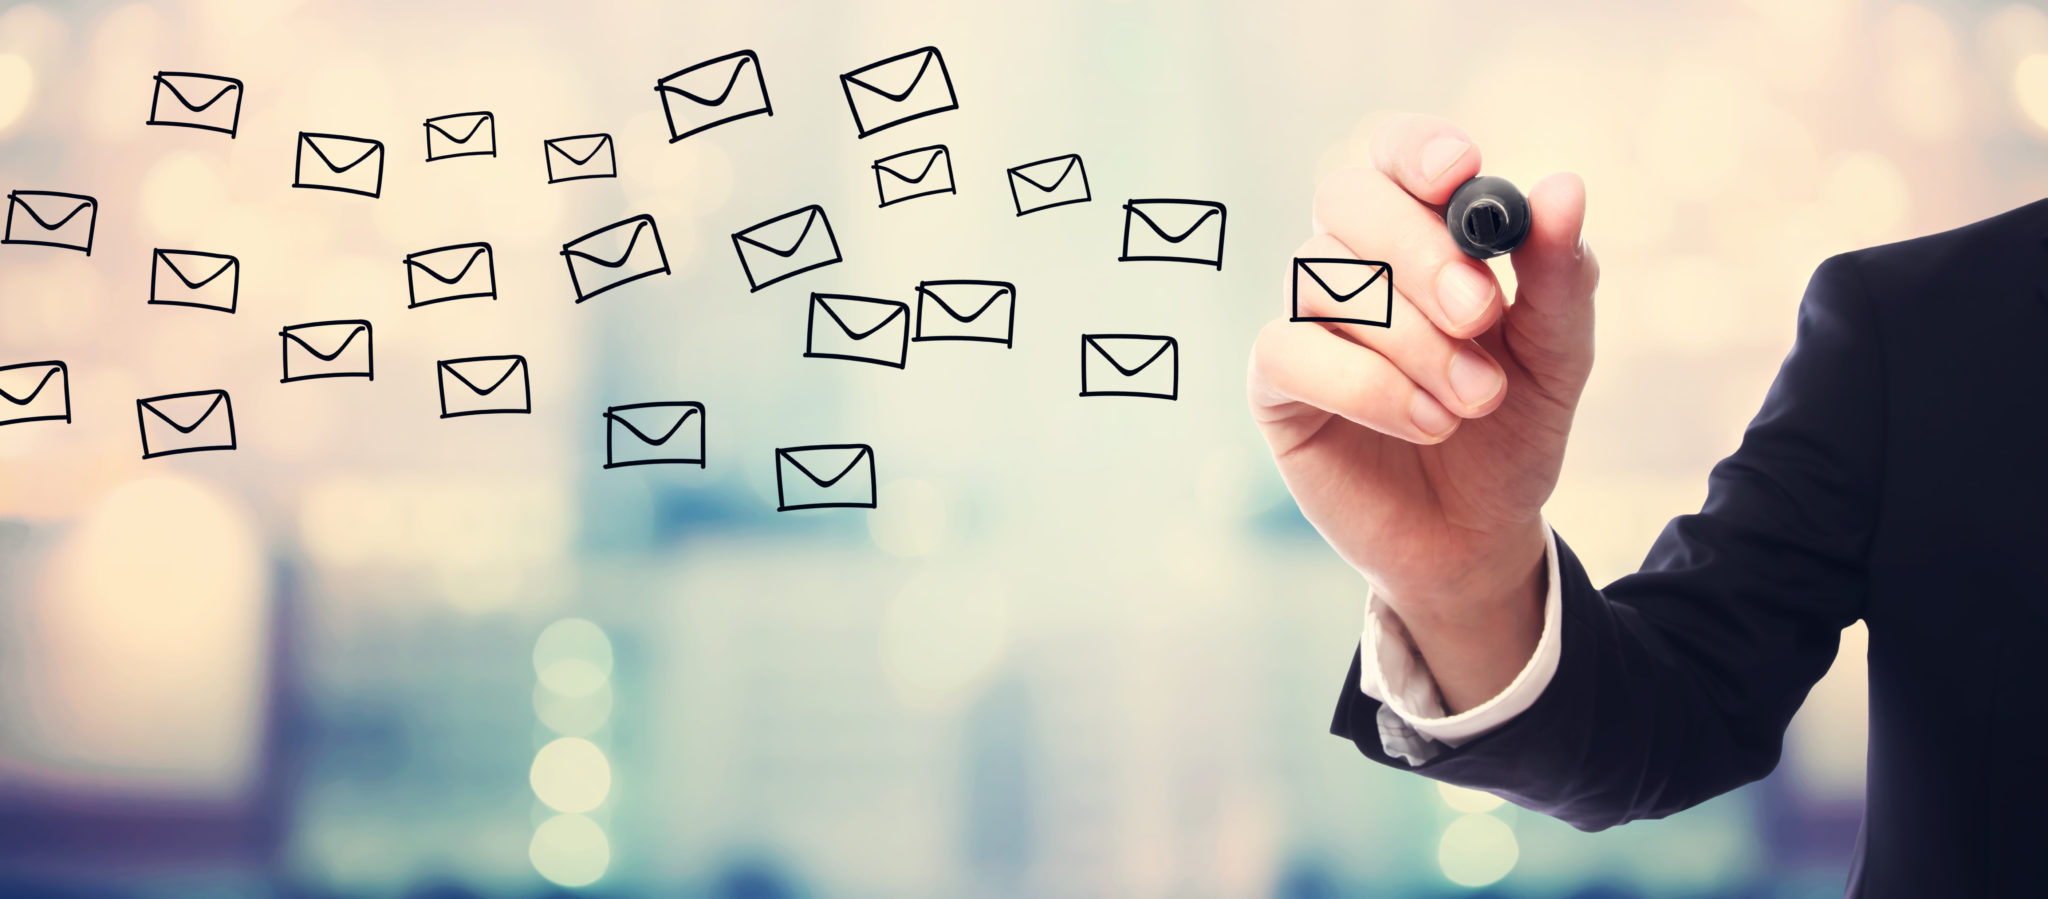 5 Creative Email Subject Lines for Professional Networking